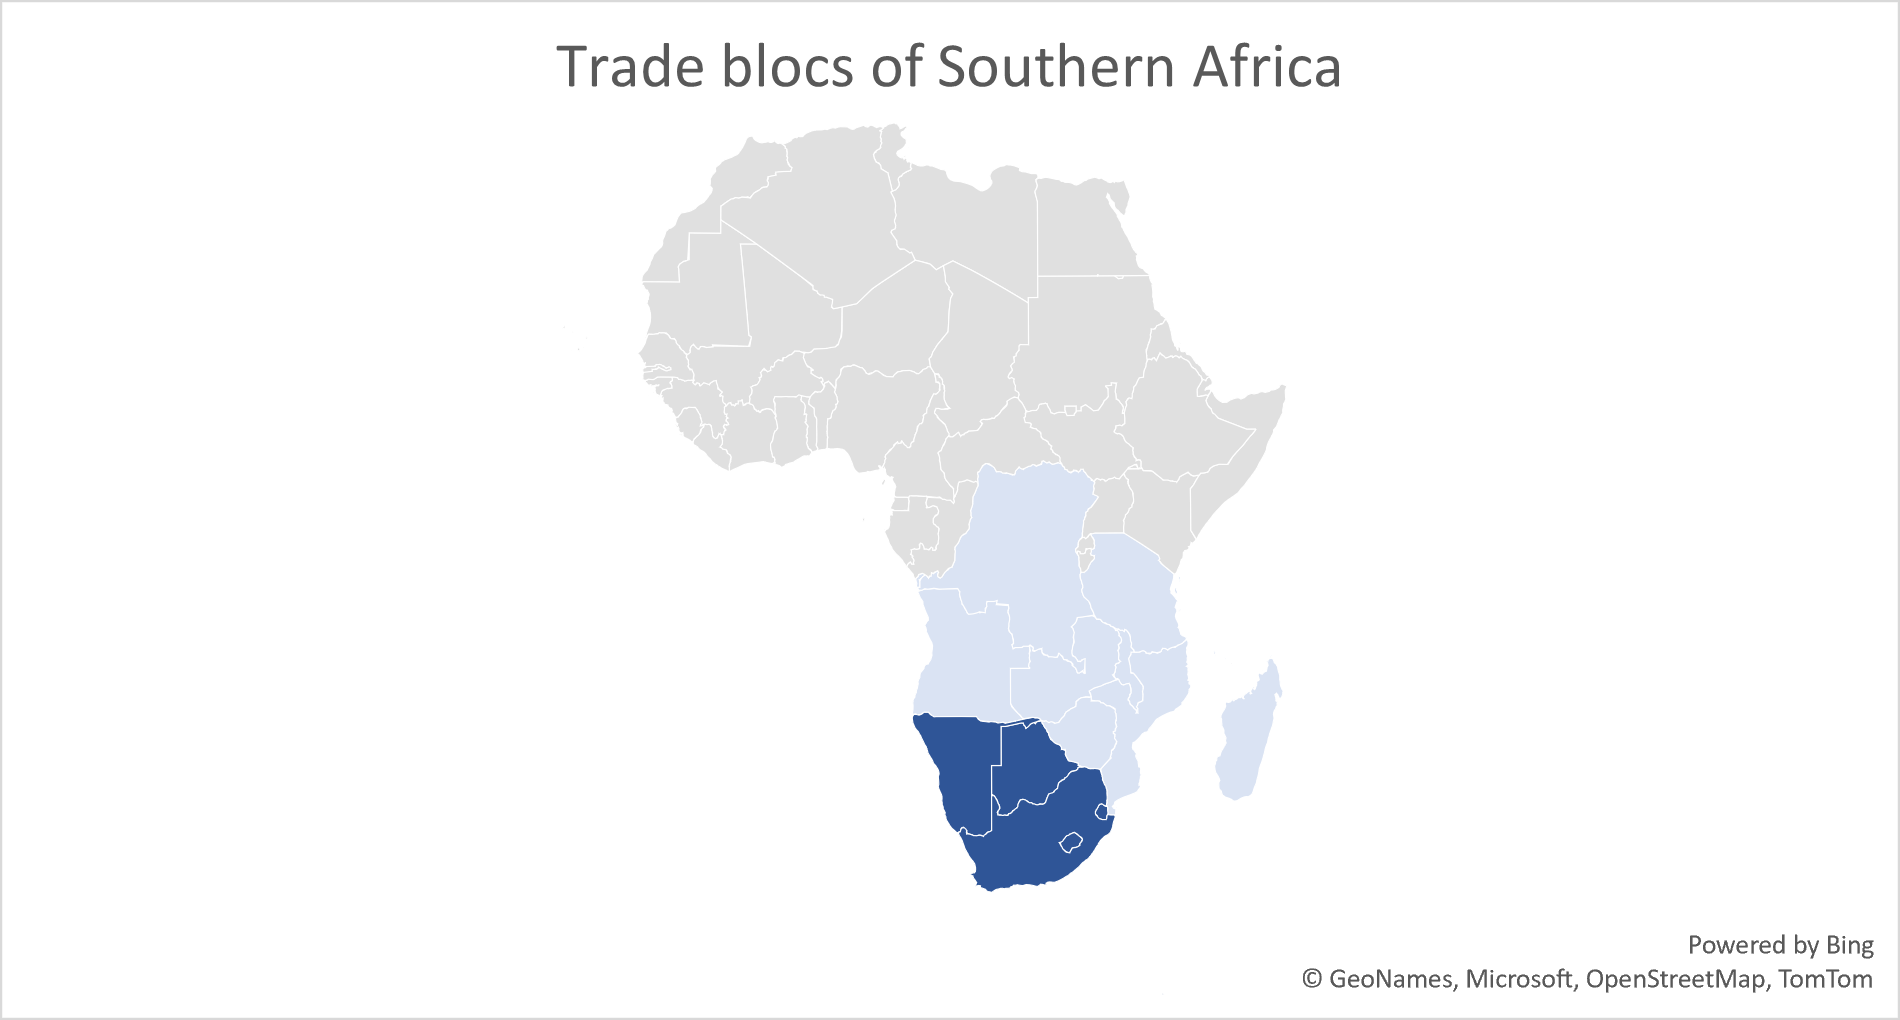 Trade blocs of Southern Africa